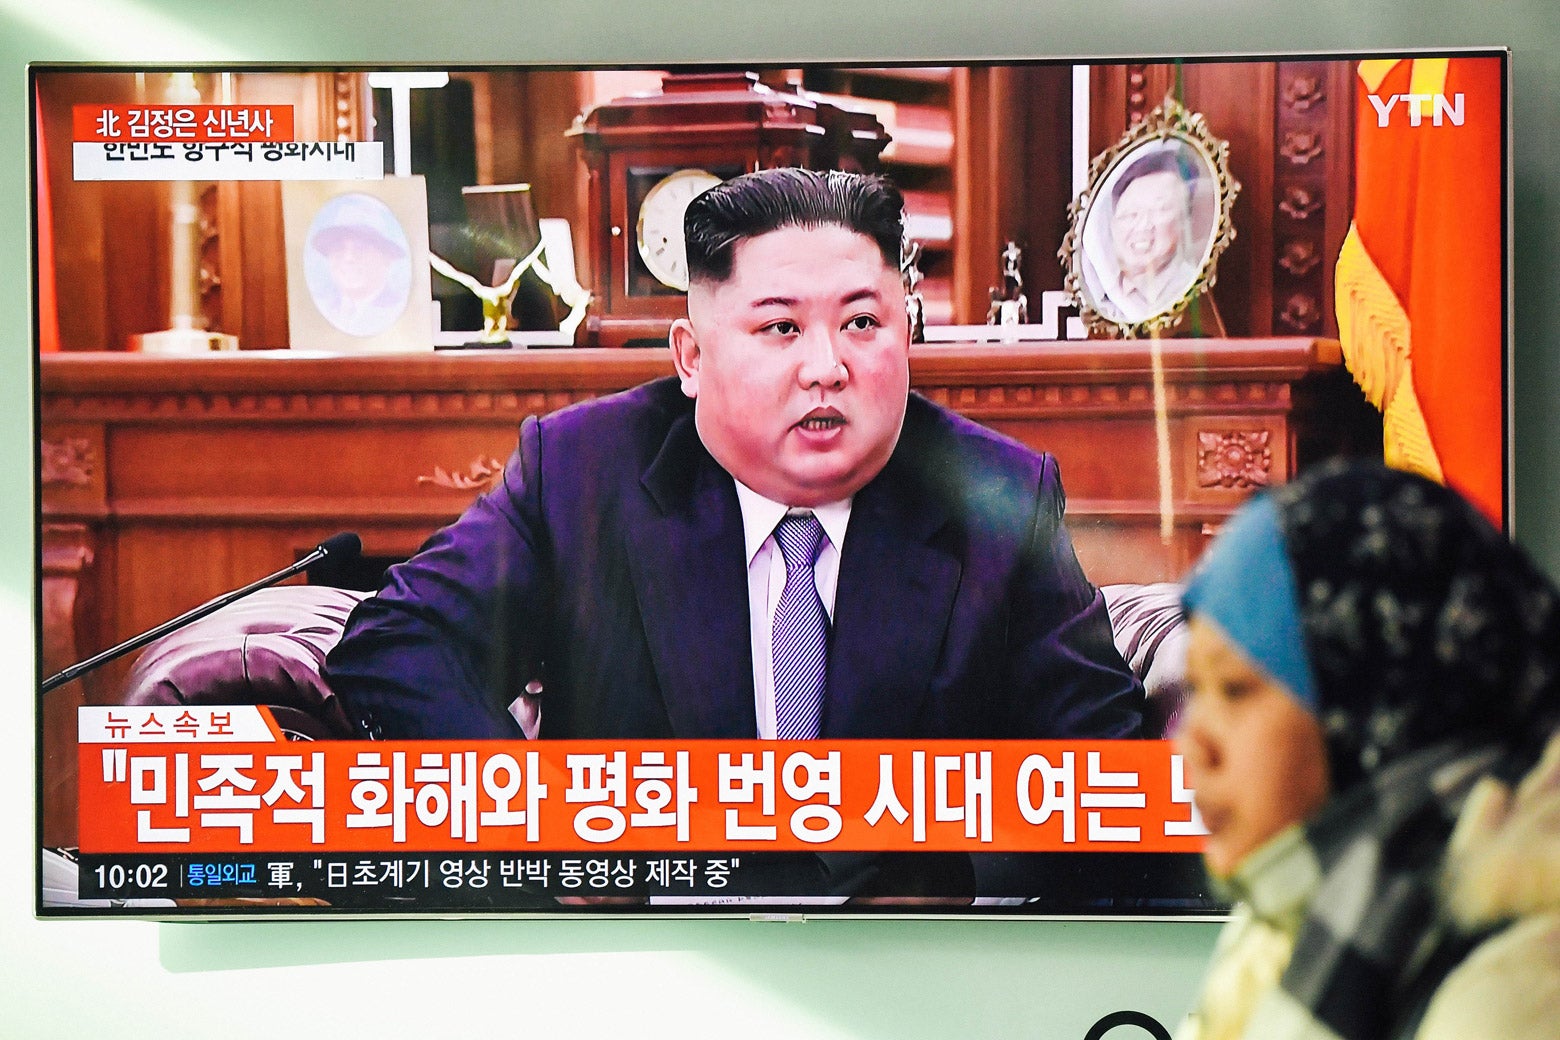 A woman walks past a television screen showing North Korean leader Kim Jong-un giving a New Year’s speech.